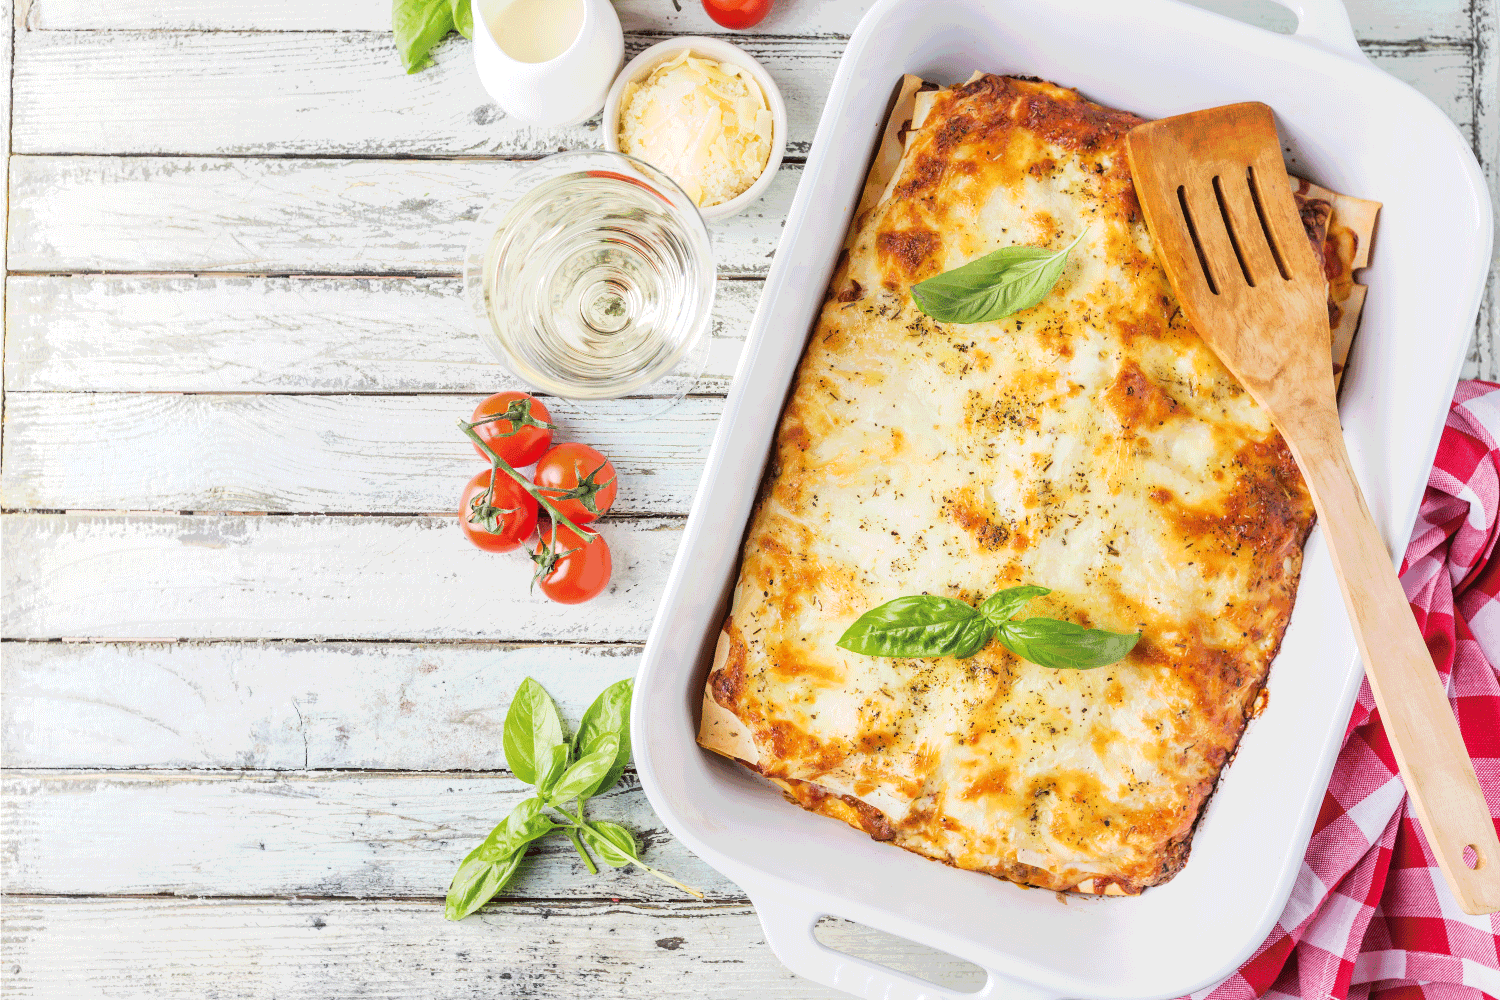 Traditional italian lasagna with vegetables, minced meat and cheese. On a wooden background. Top view